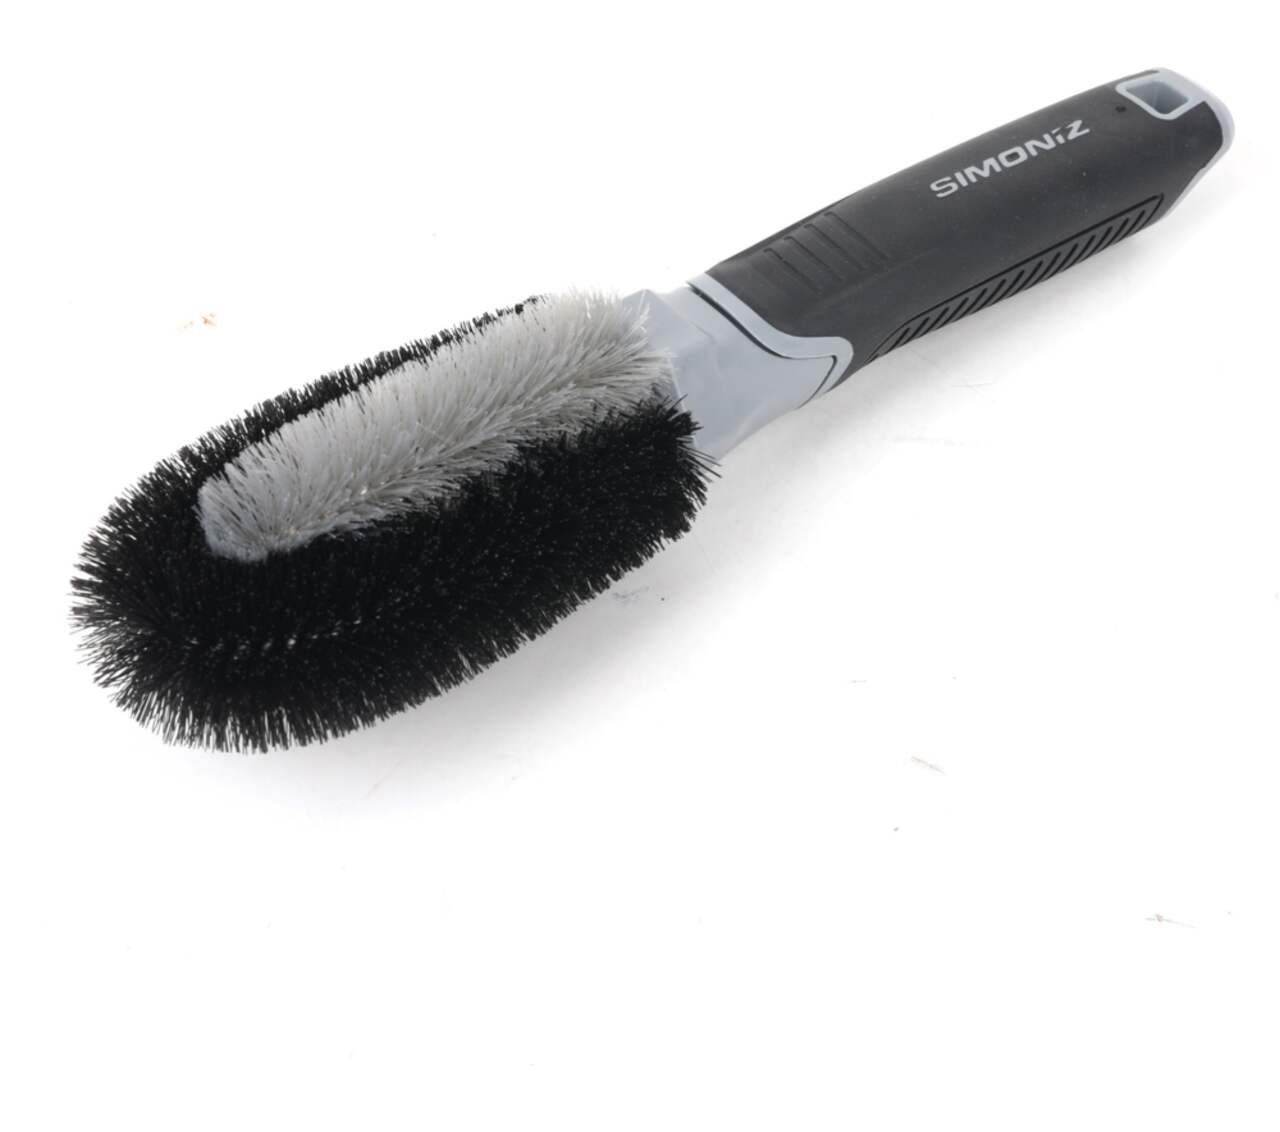 1pc Drum Washing Machine Cleaning Brush - Special Tool For Inner